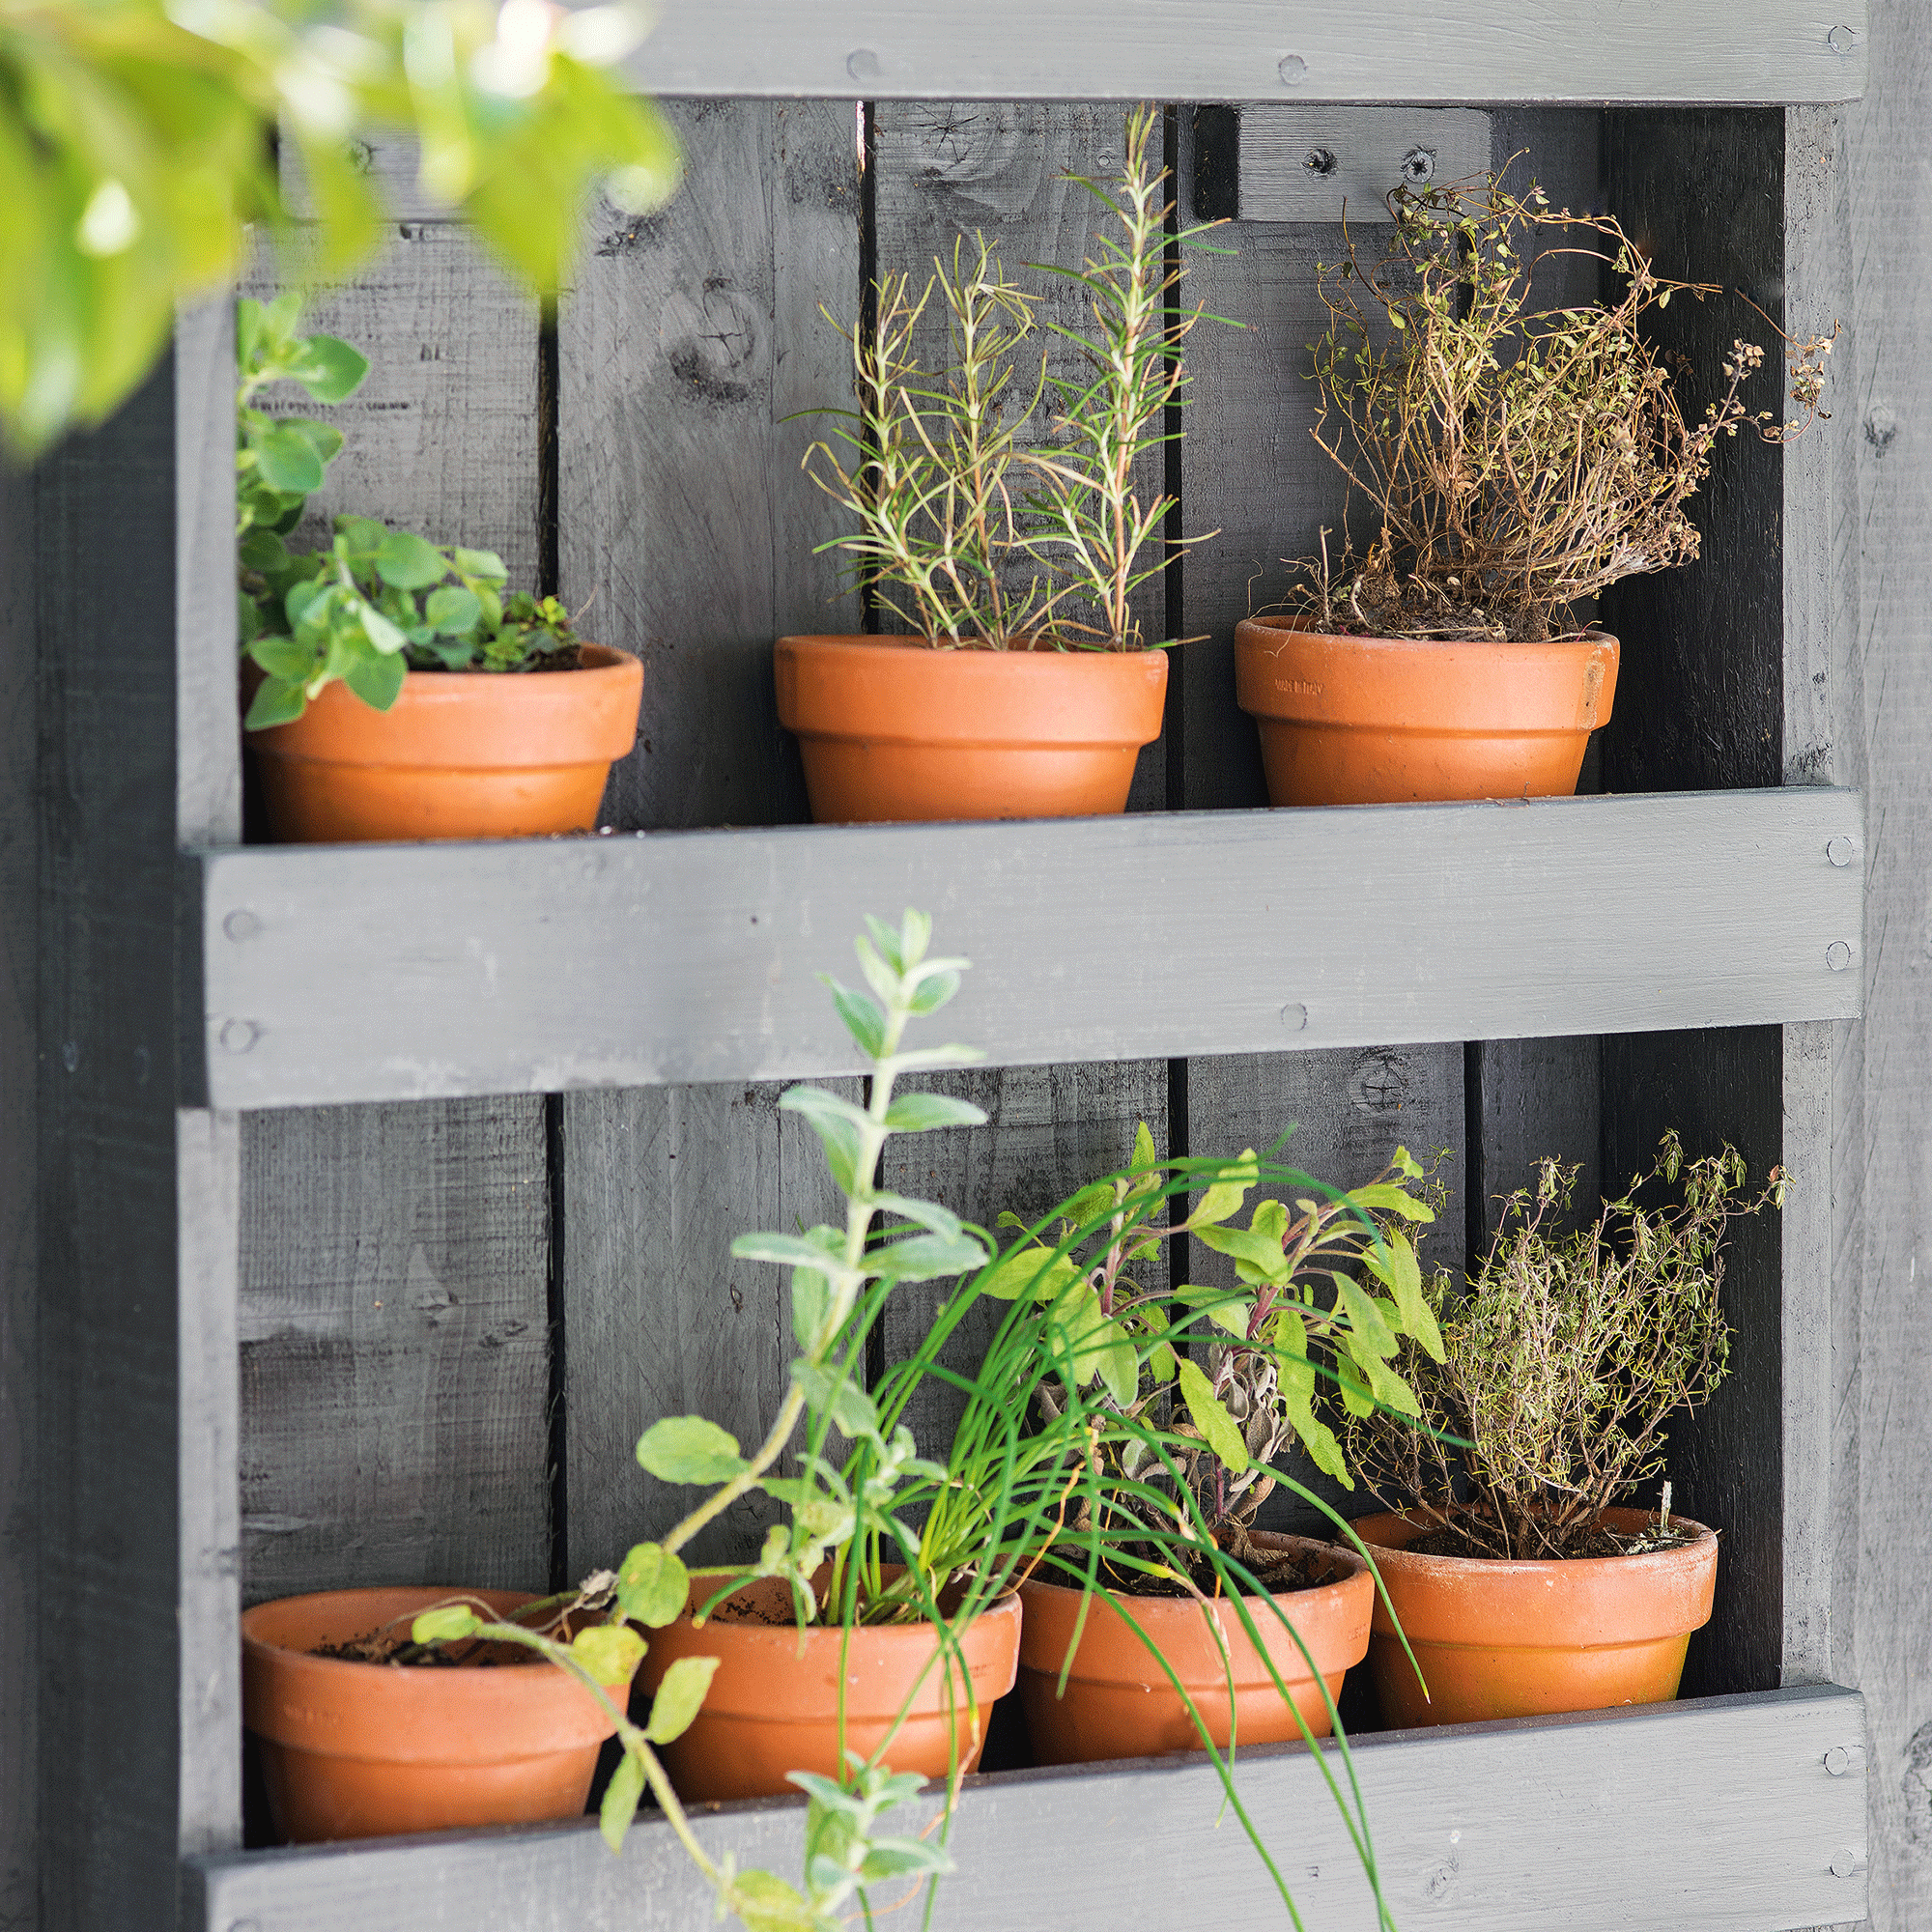 Plant pots with herbs in blue DIY planter